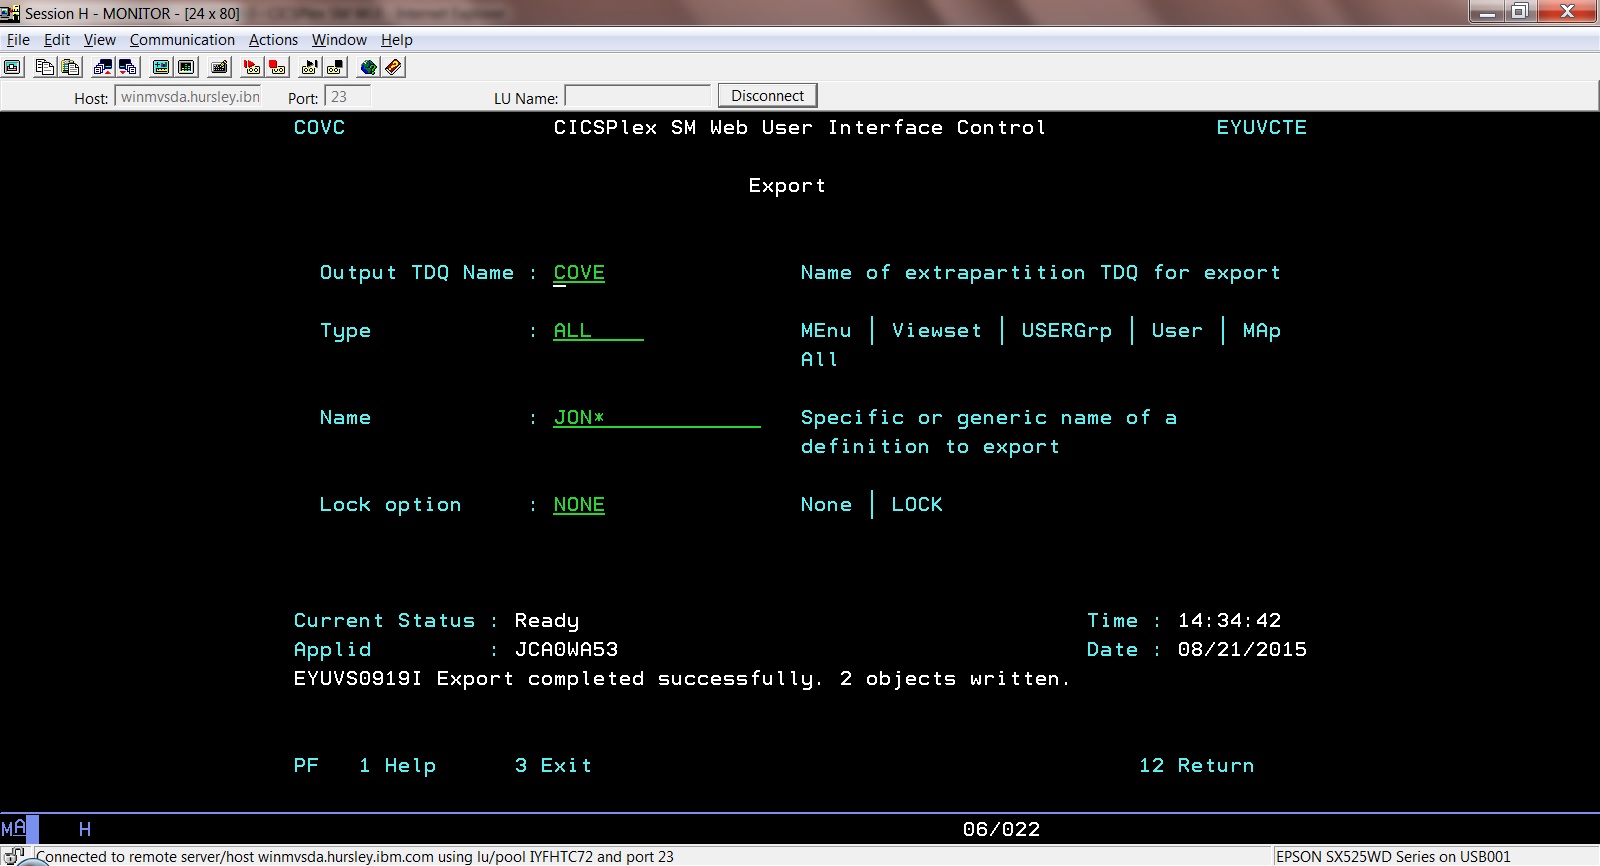 This screenshot from the CPSM WUI shows the use of COVC Export.